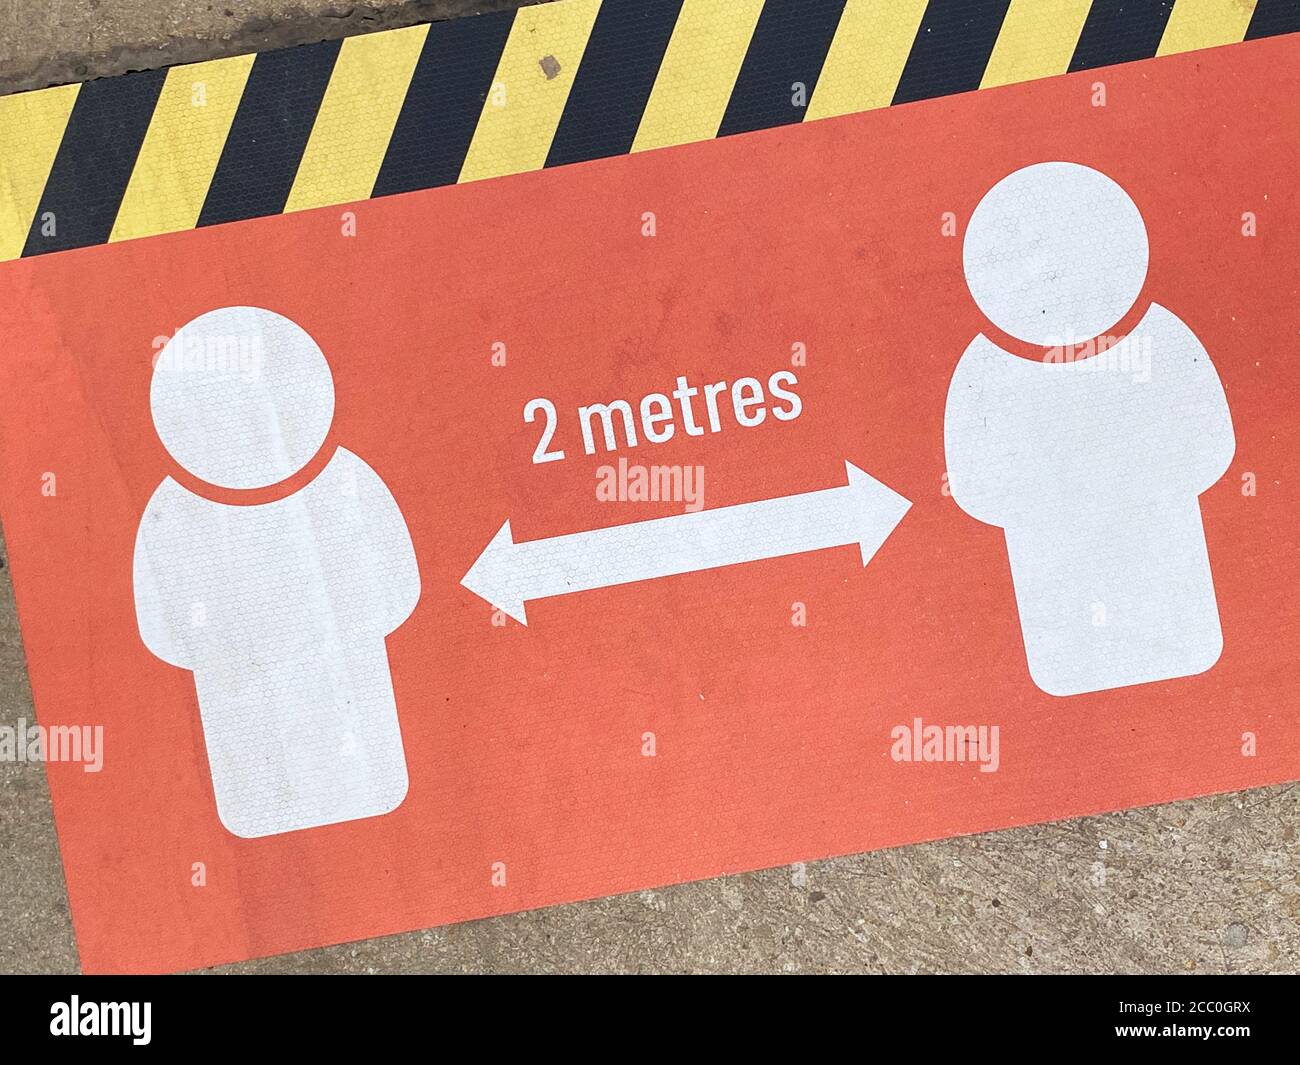 Social distance message to stay 2 metres apart during coronavirus Stock Photo